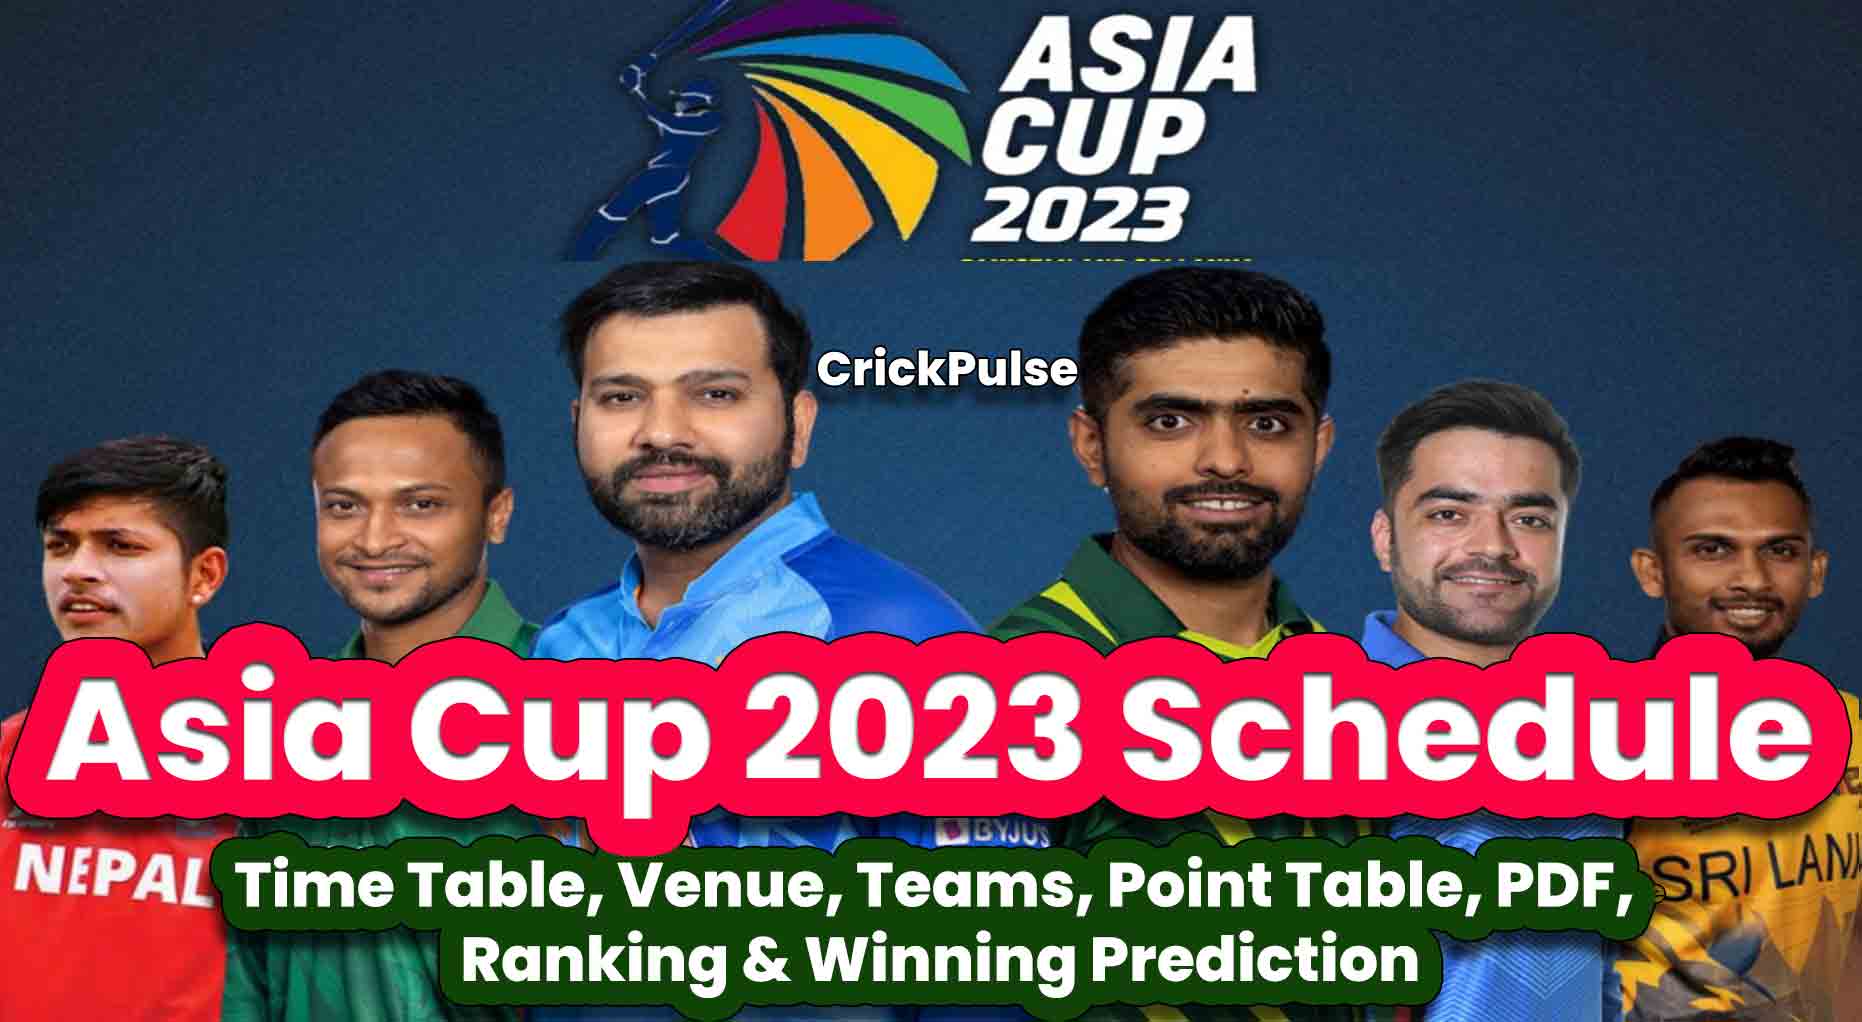 Asia Cup 2023 Schedule, Timetable, Venue, Teams, Point Table, PDF, Tickets, Ranking and Winning Prediction Today